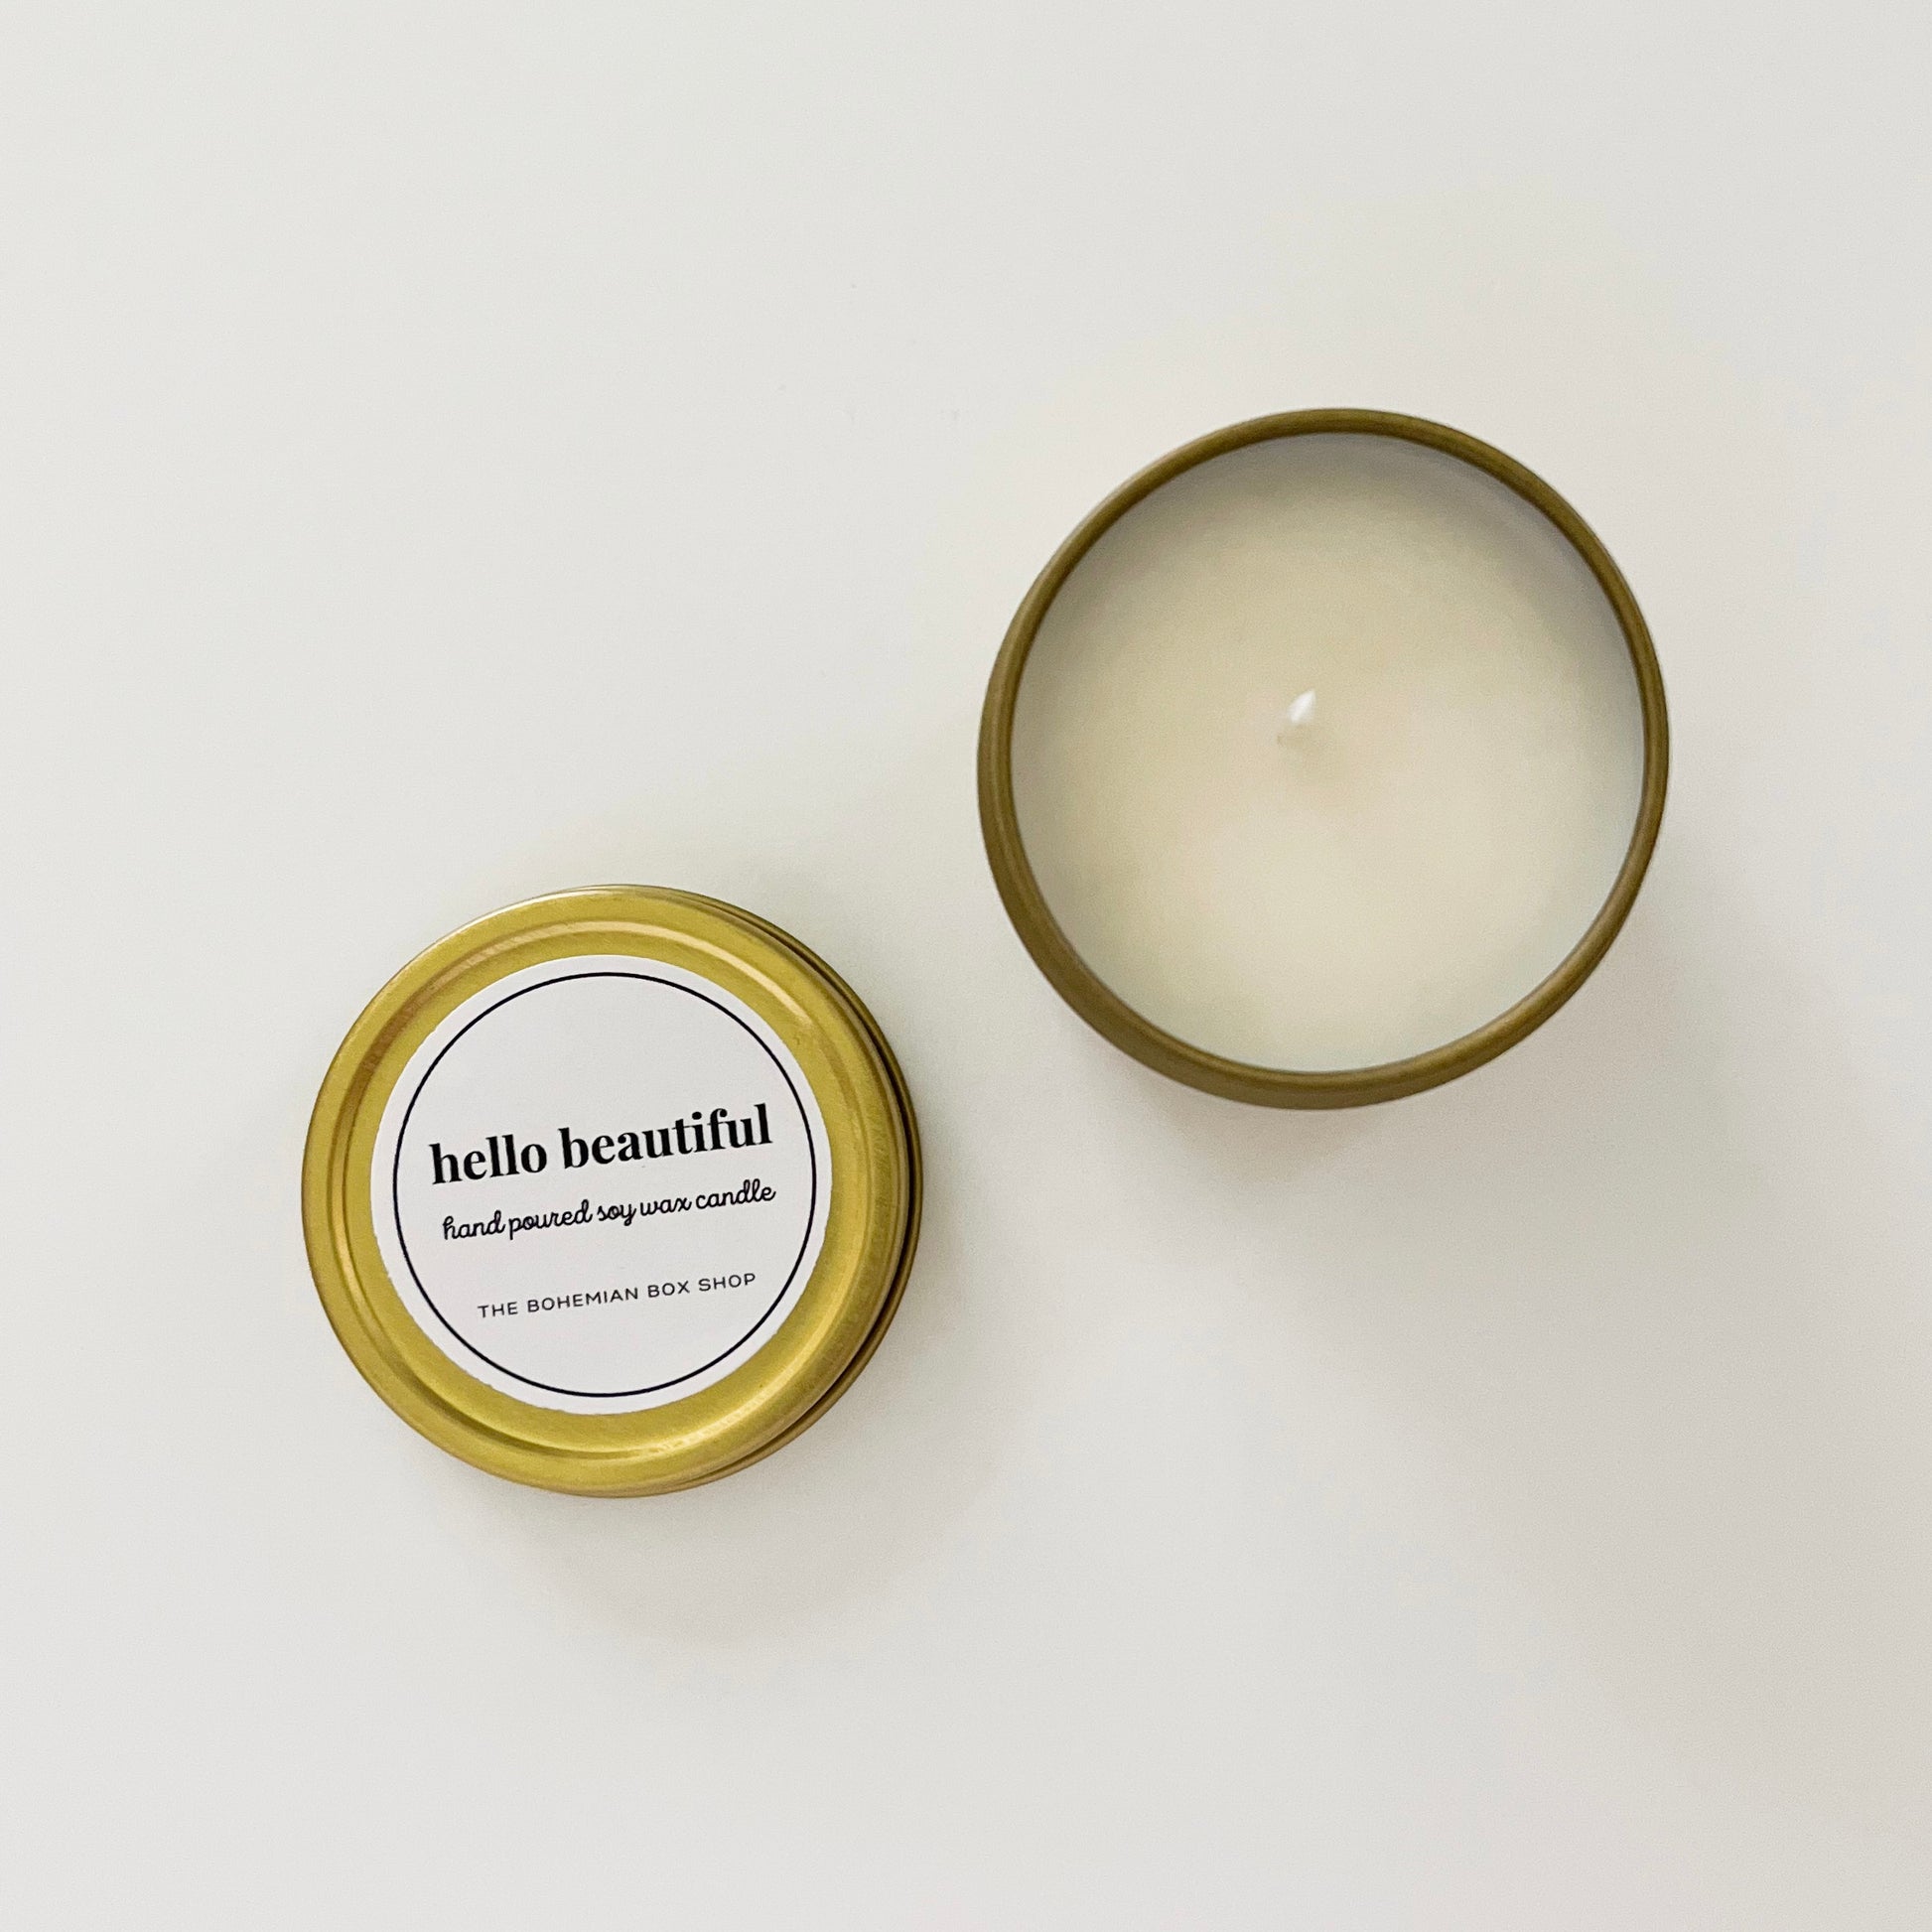 Hello beautiful 2 ounce soy candle tin in the color gold. 